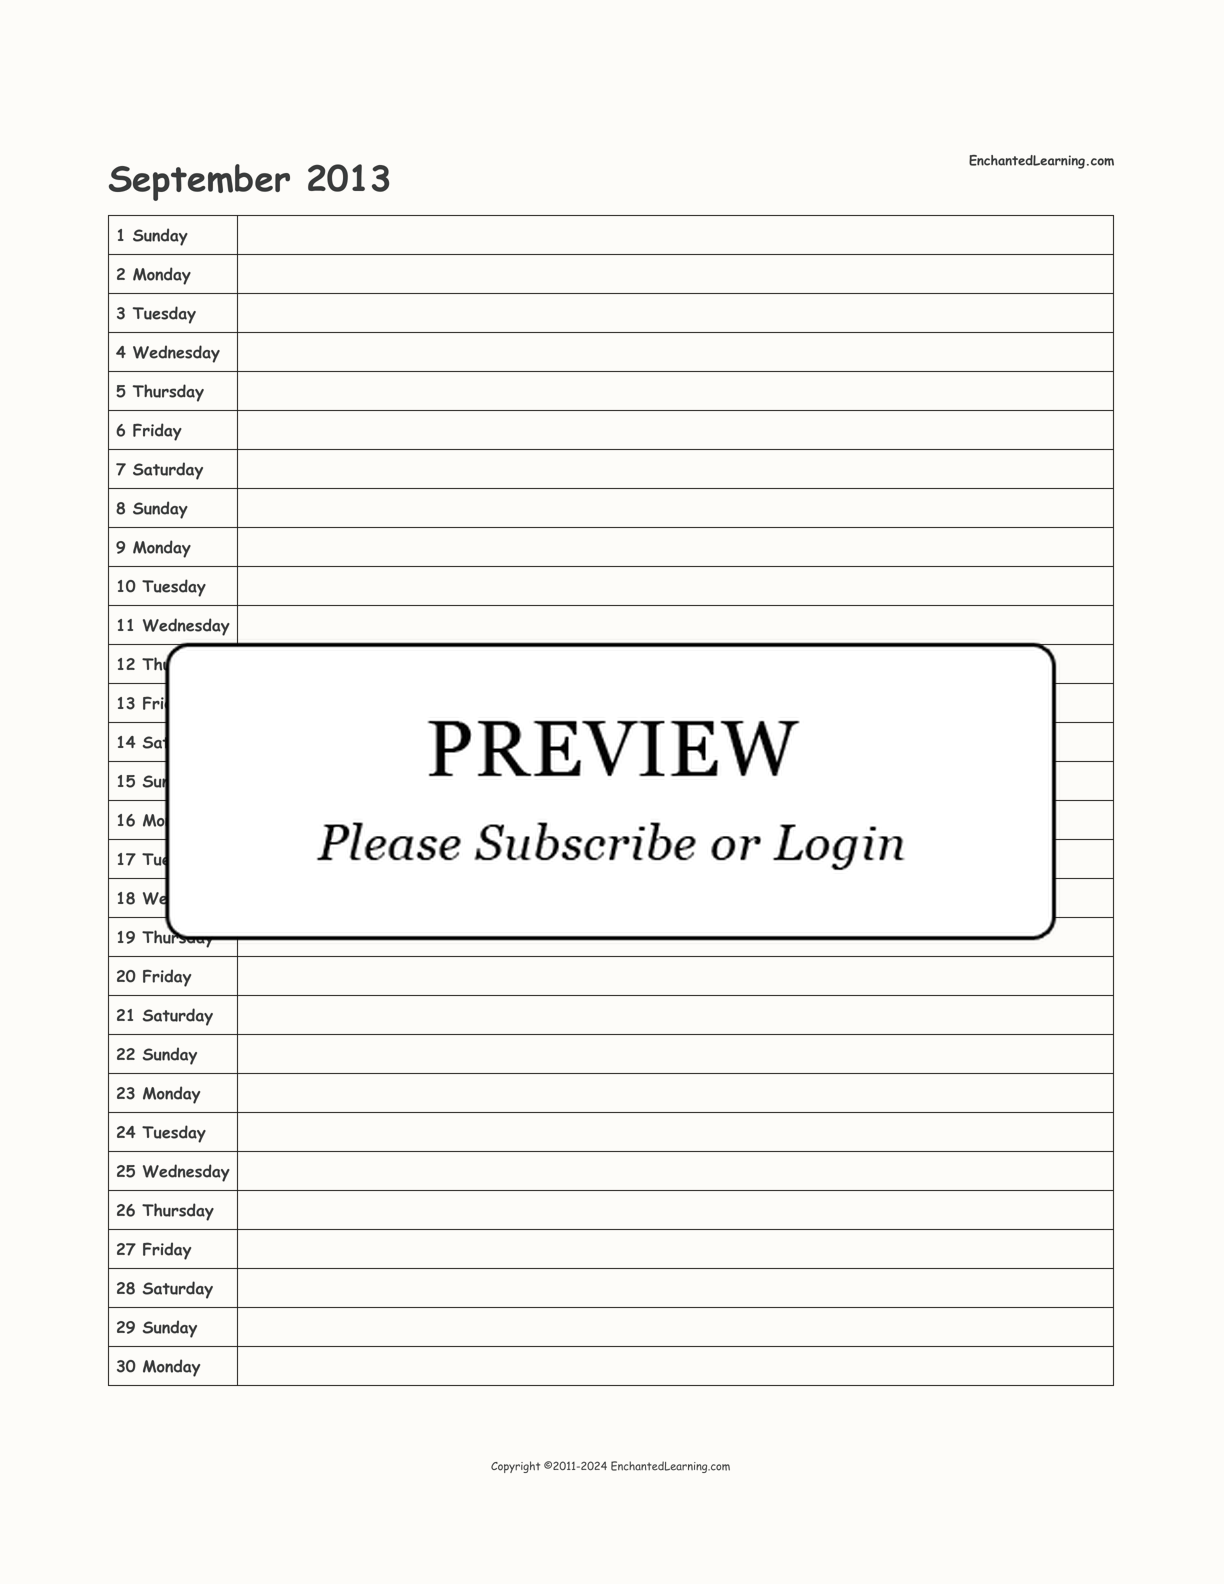 2013 Scheduling Calendar interactive printout page 9